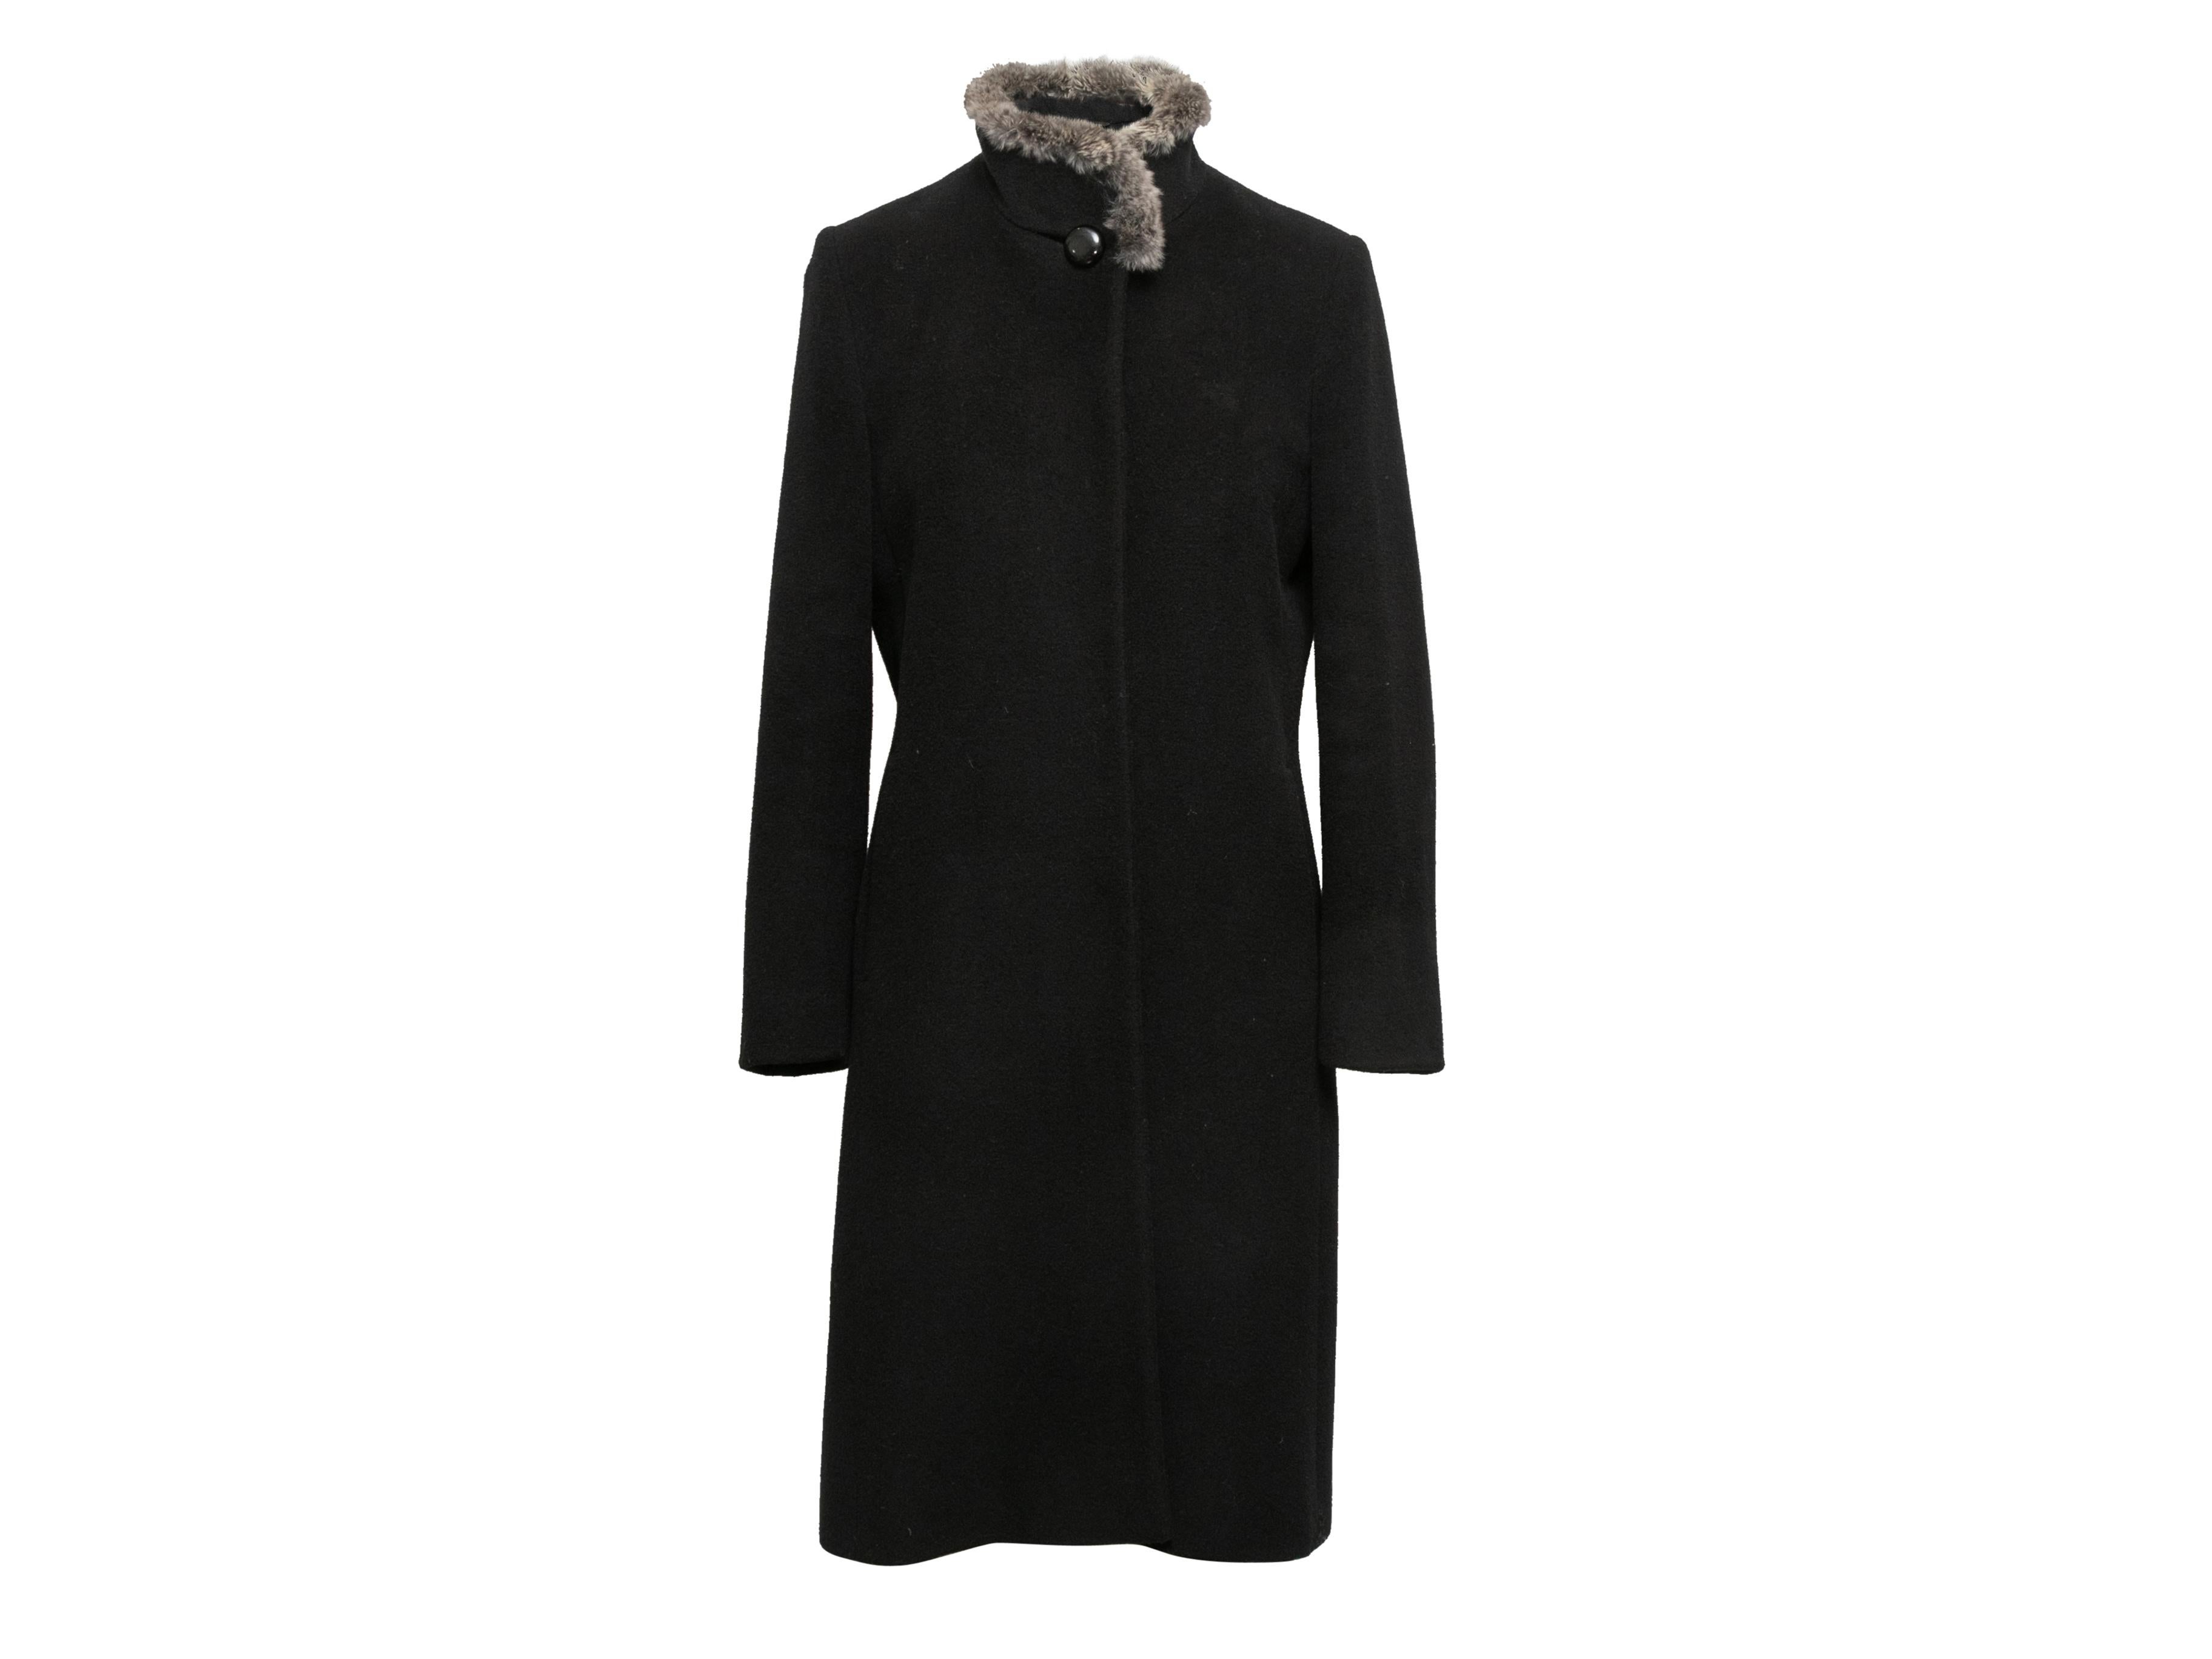 Black wool and cashmere-blend long coat by Cinzia Rocca. Chinchilla fur trim at stand collar. Front button closure. 38